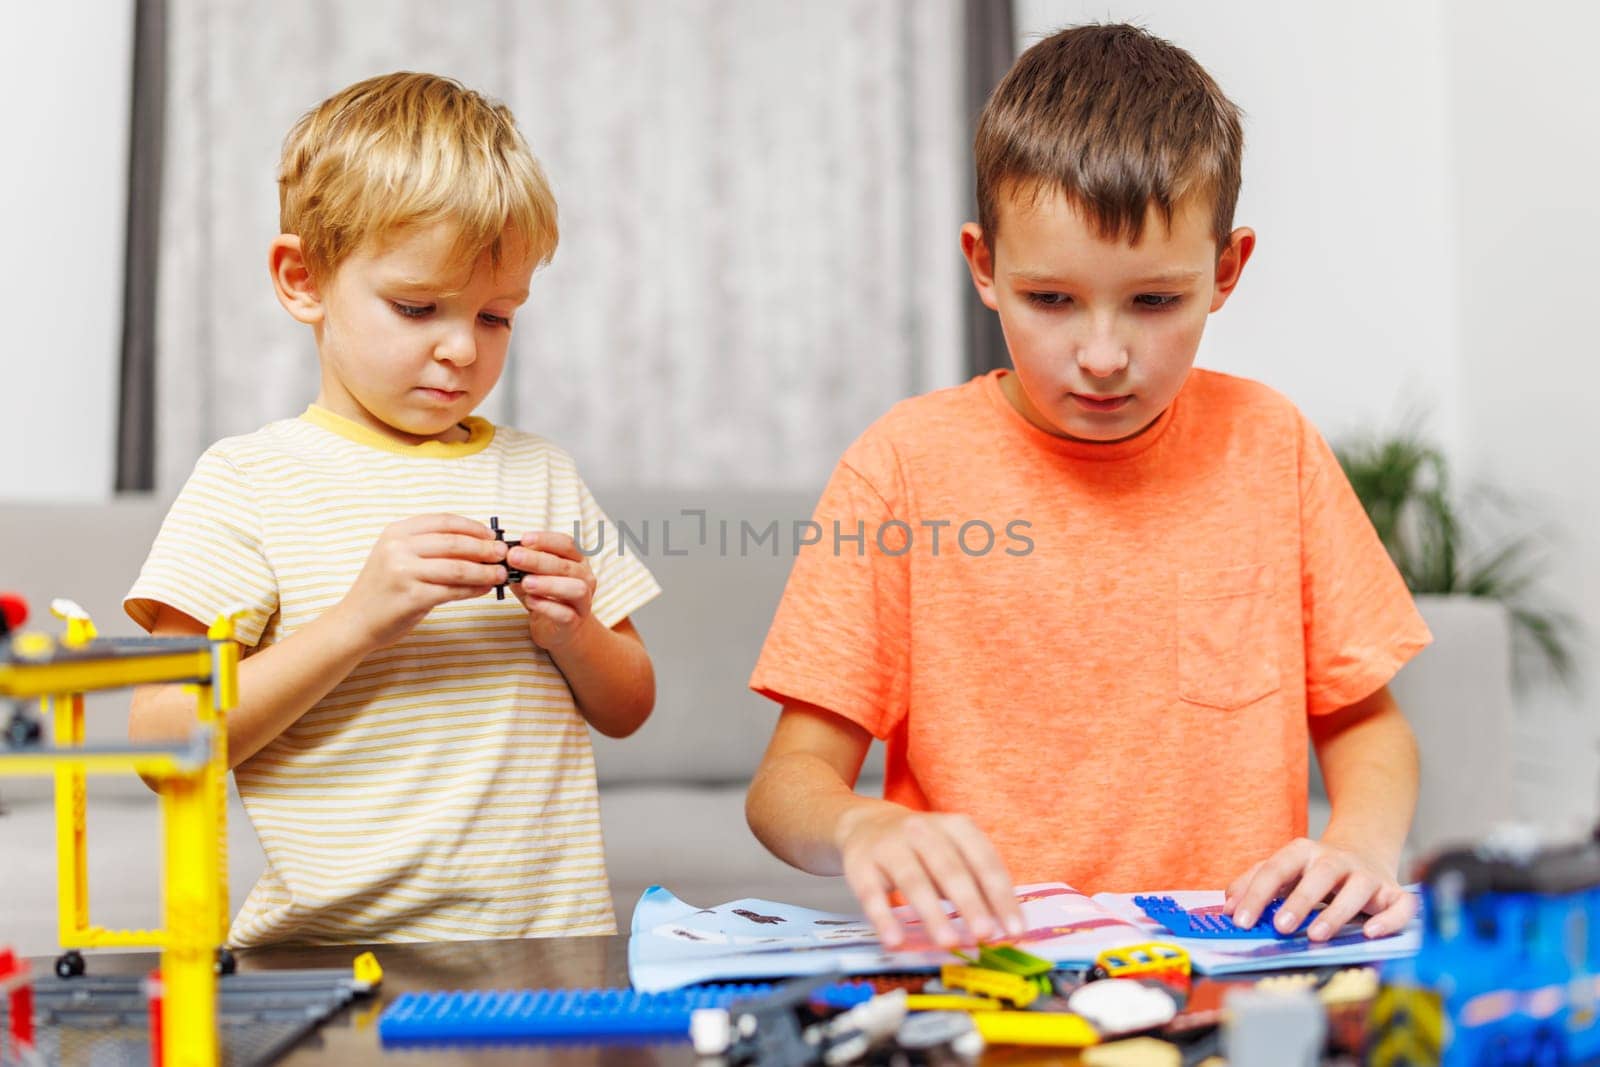 Two children playing and building with colorful plastic bricks at the table by andreyz